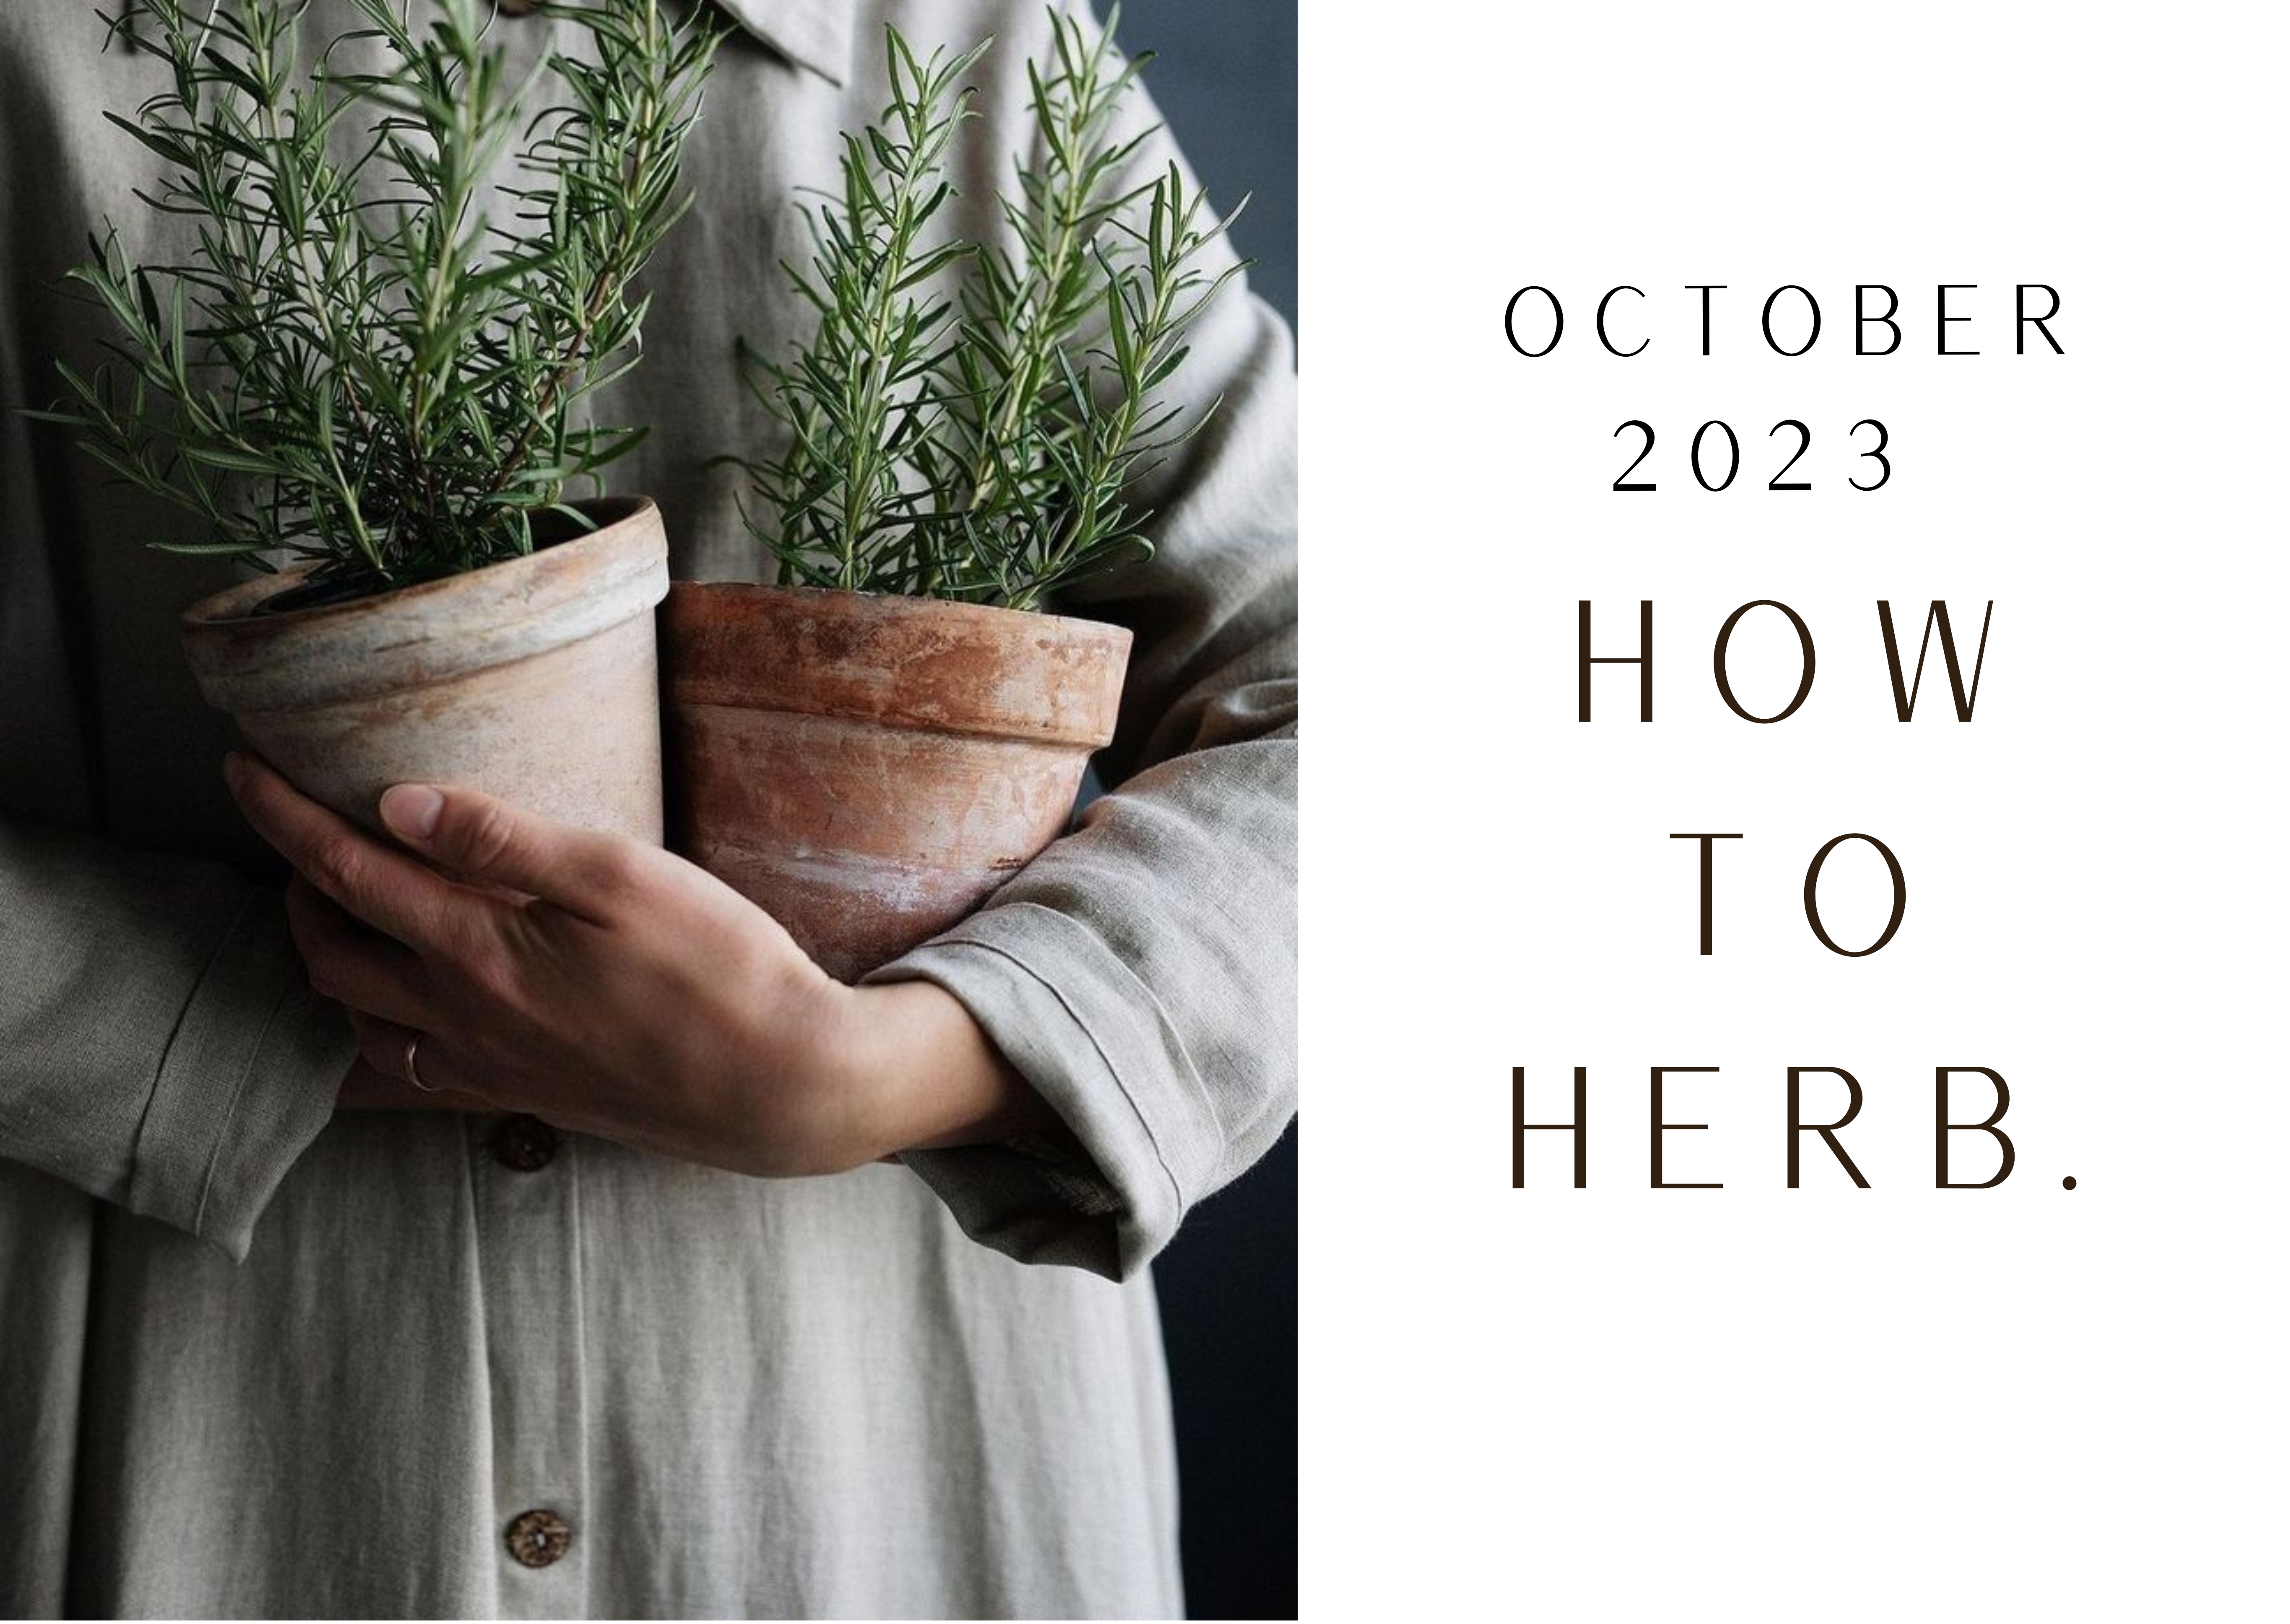 How To Herb